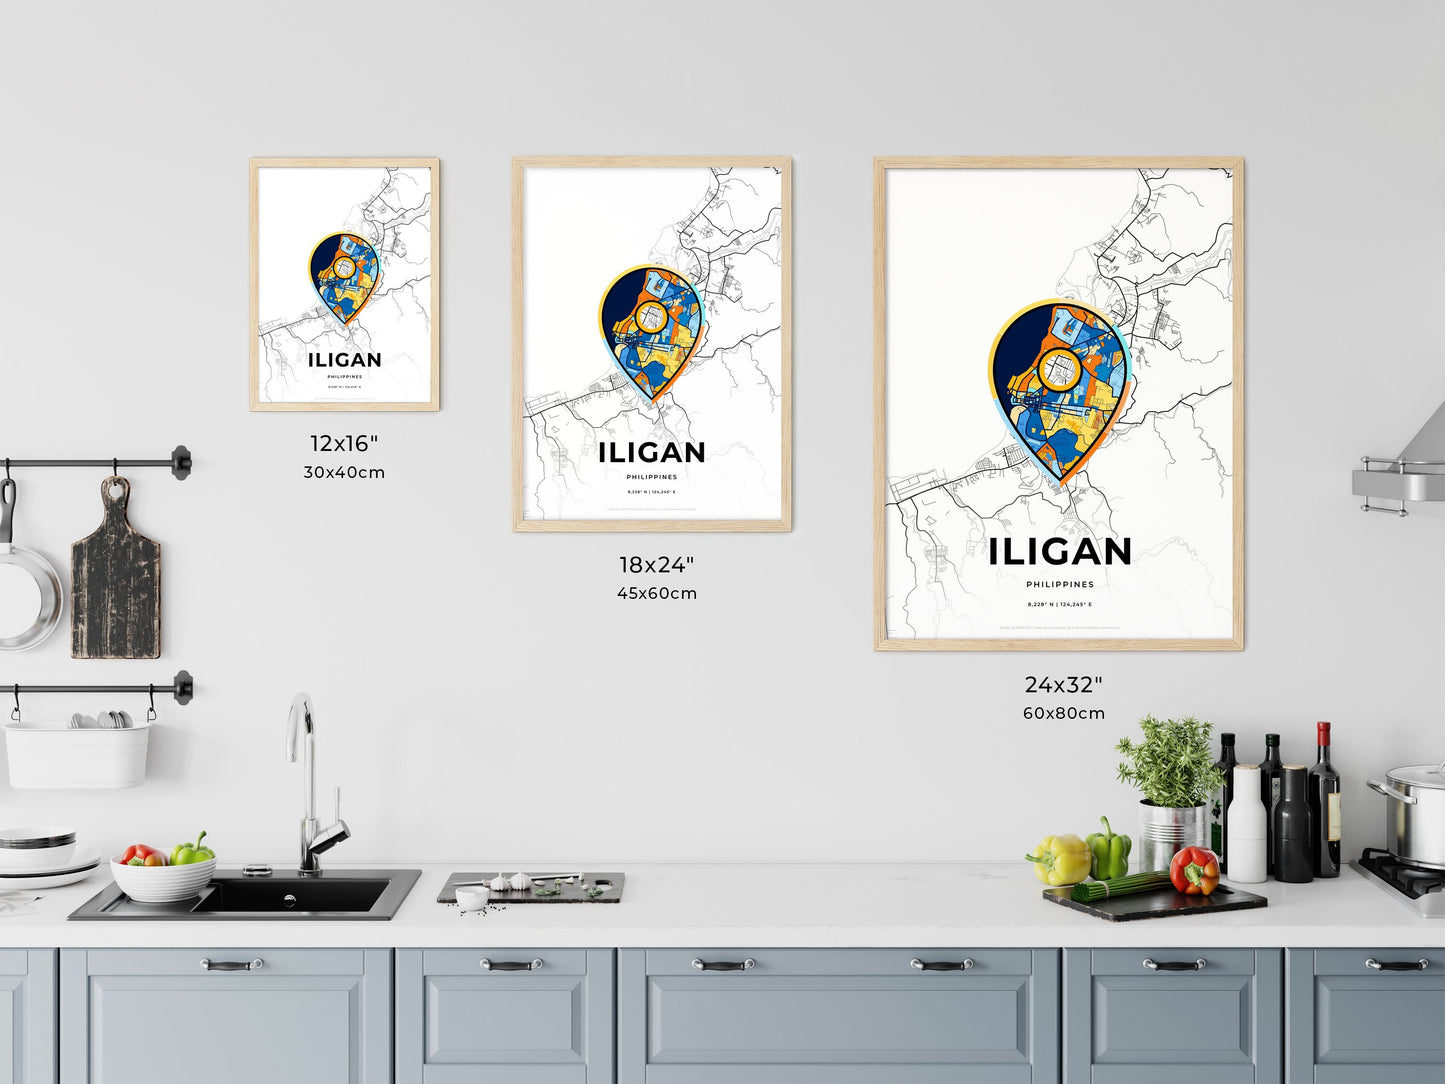 ILIGAN PHILIPPINES minimal art map with a colorful icon. Where it all began, Couple map gift.